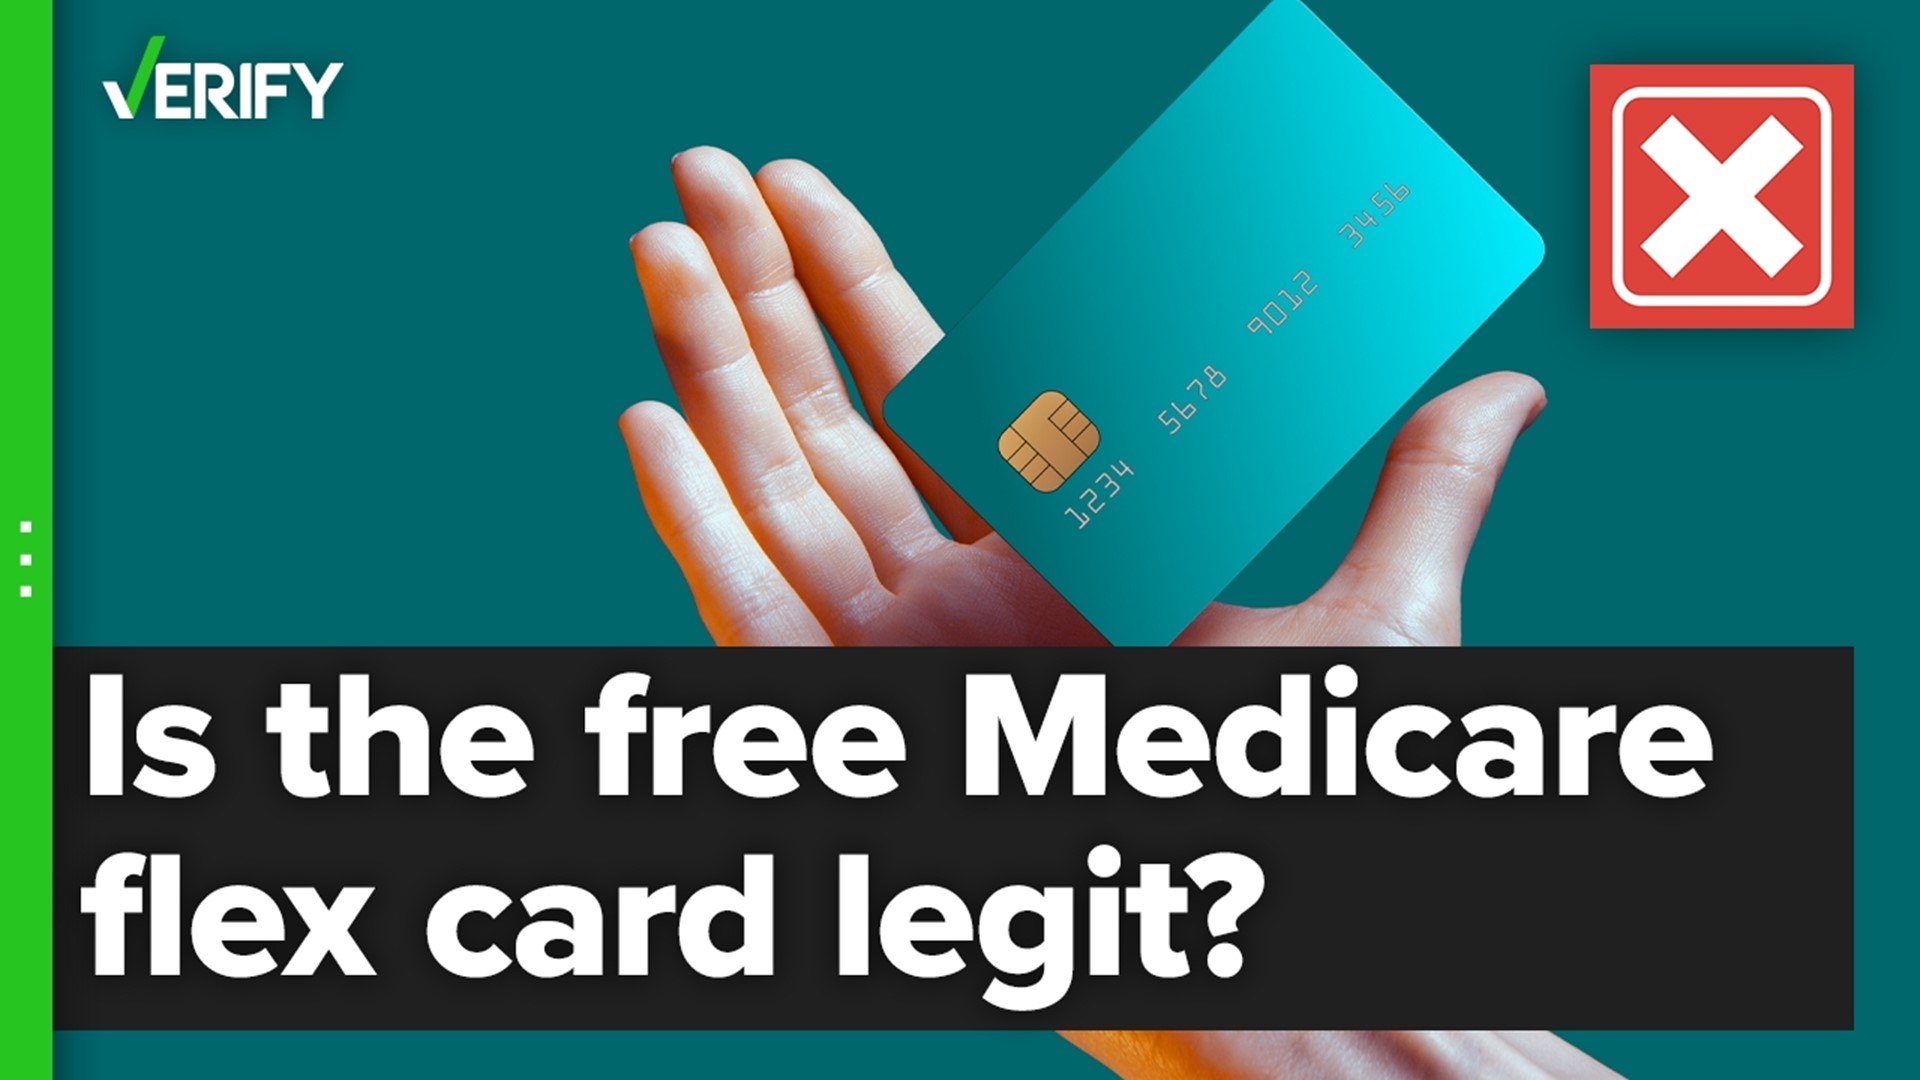 While some Medicare Advantage plans run by private insurers offer flex cards worth a few hundred dollars, they aren’t available for free from original Medicare.